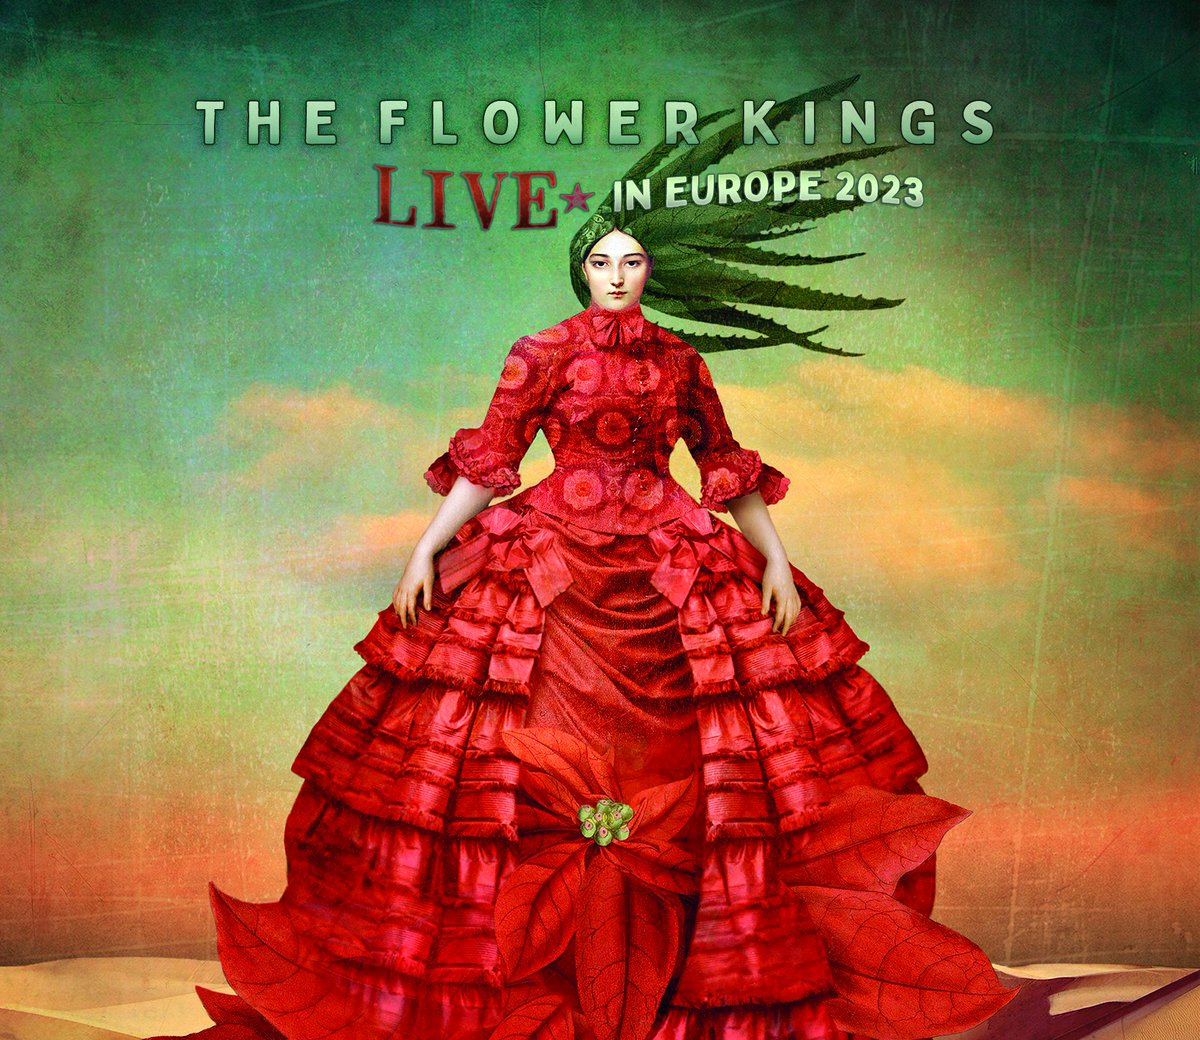 CD newOut May 17th The Flower Kings Live/ Netherlands Playing classics,showing strength as melodic, incredibly dynamic unit - plenty space for members to shine. Finest rec doc of TFK live ever . Mirko DeMaio Michael Stolt Lalle Larsson Hasse Fröberg Roine Stolt FOX CD 034